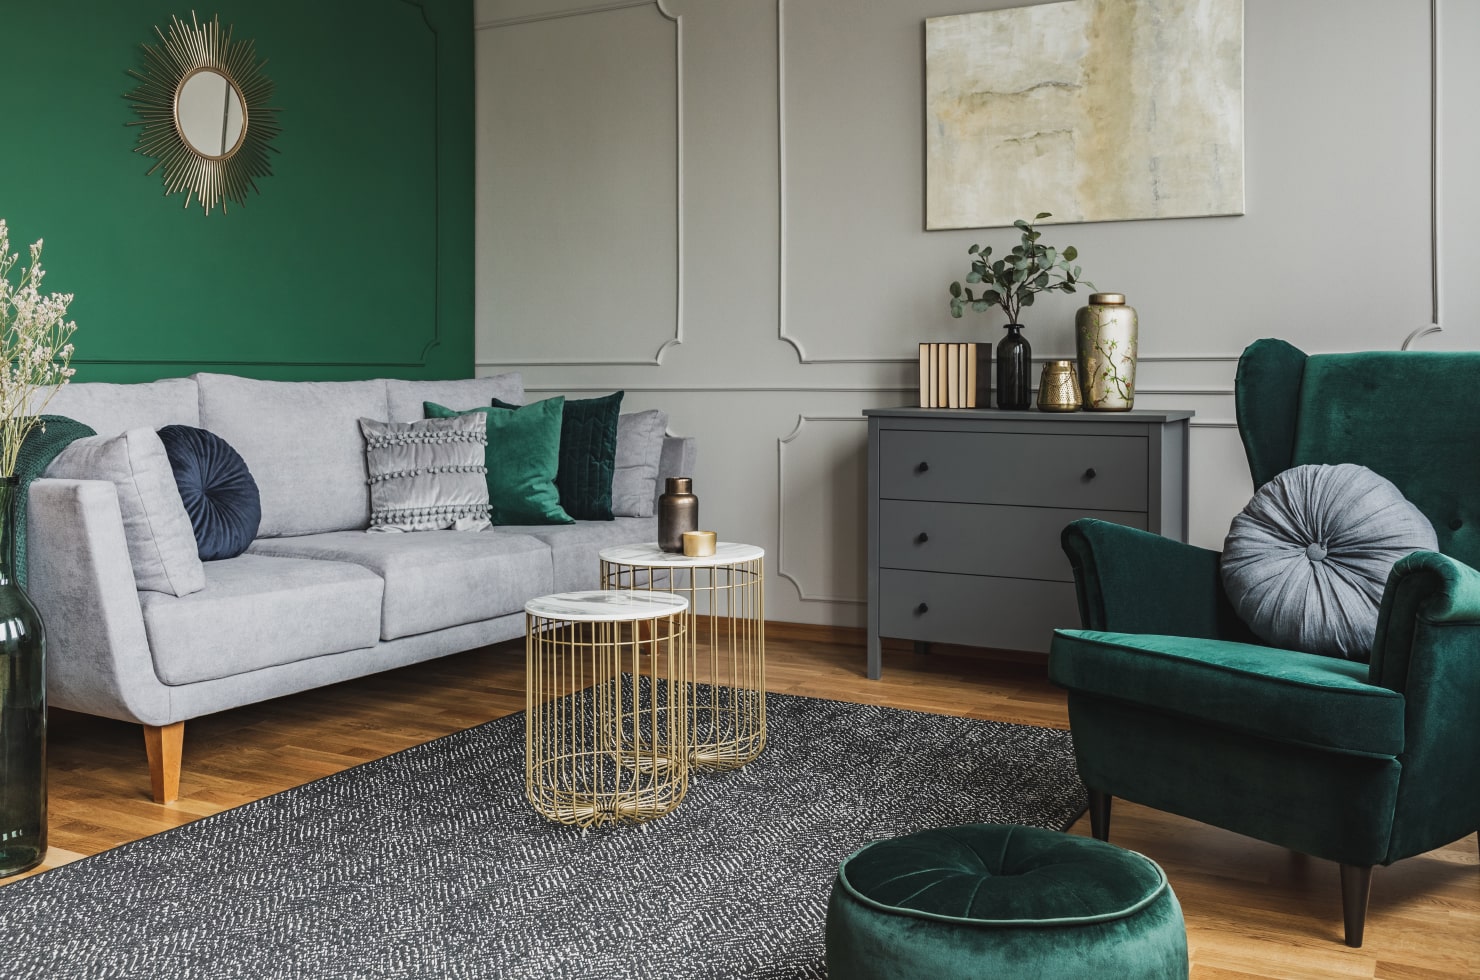 Living room in green and gray tones.